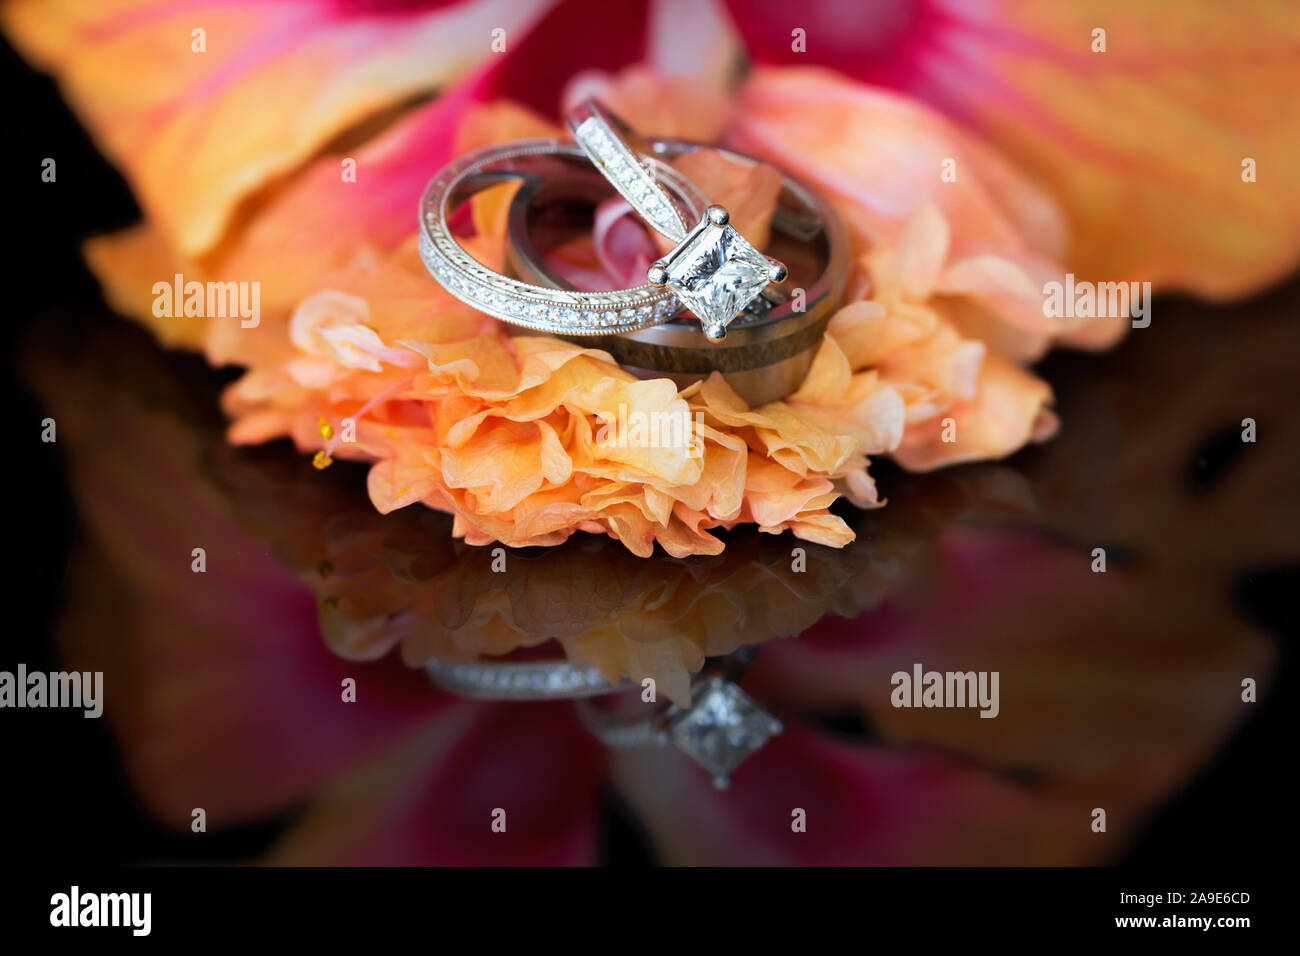 Wedding rings on an orange hibiscus flower, with a reflection on the black surface Stock Photo